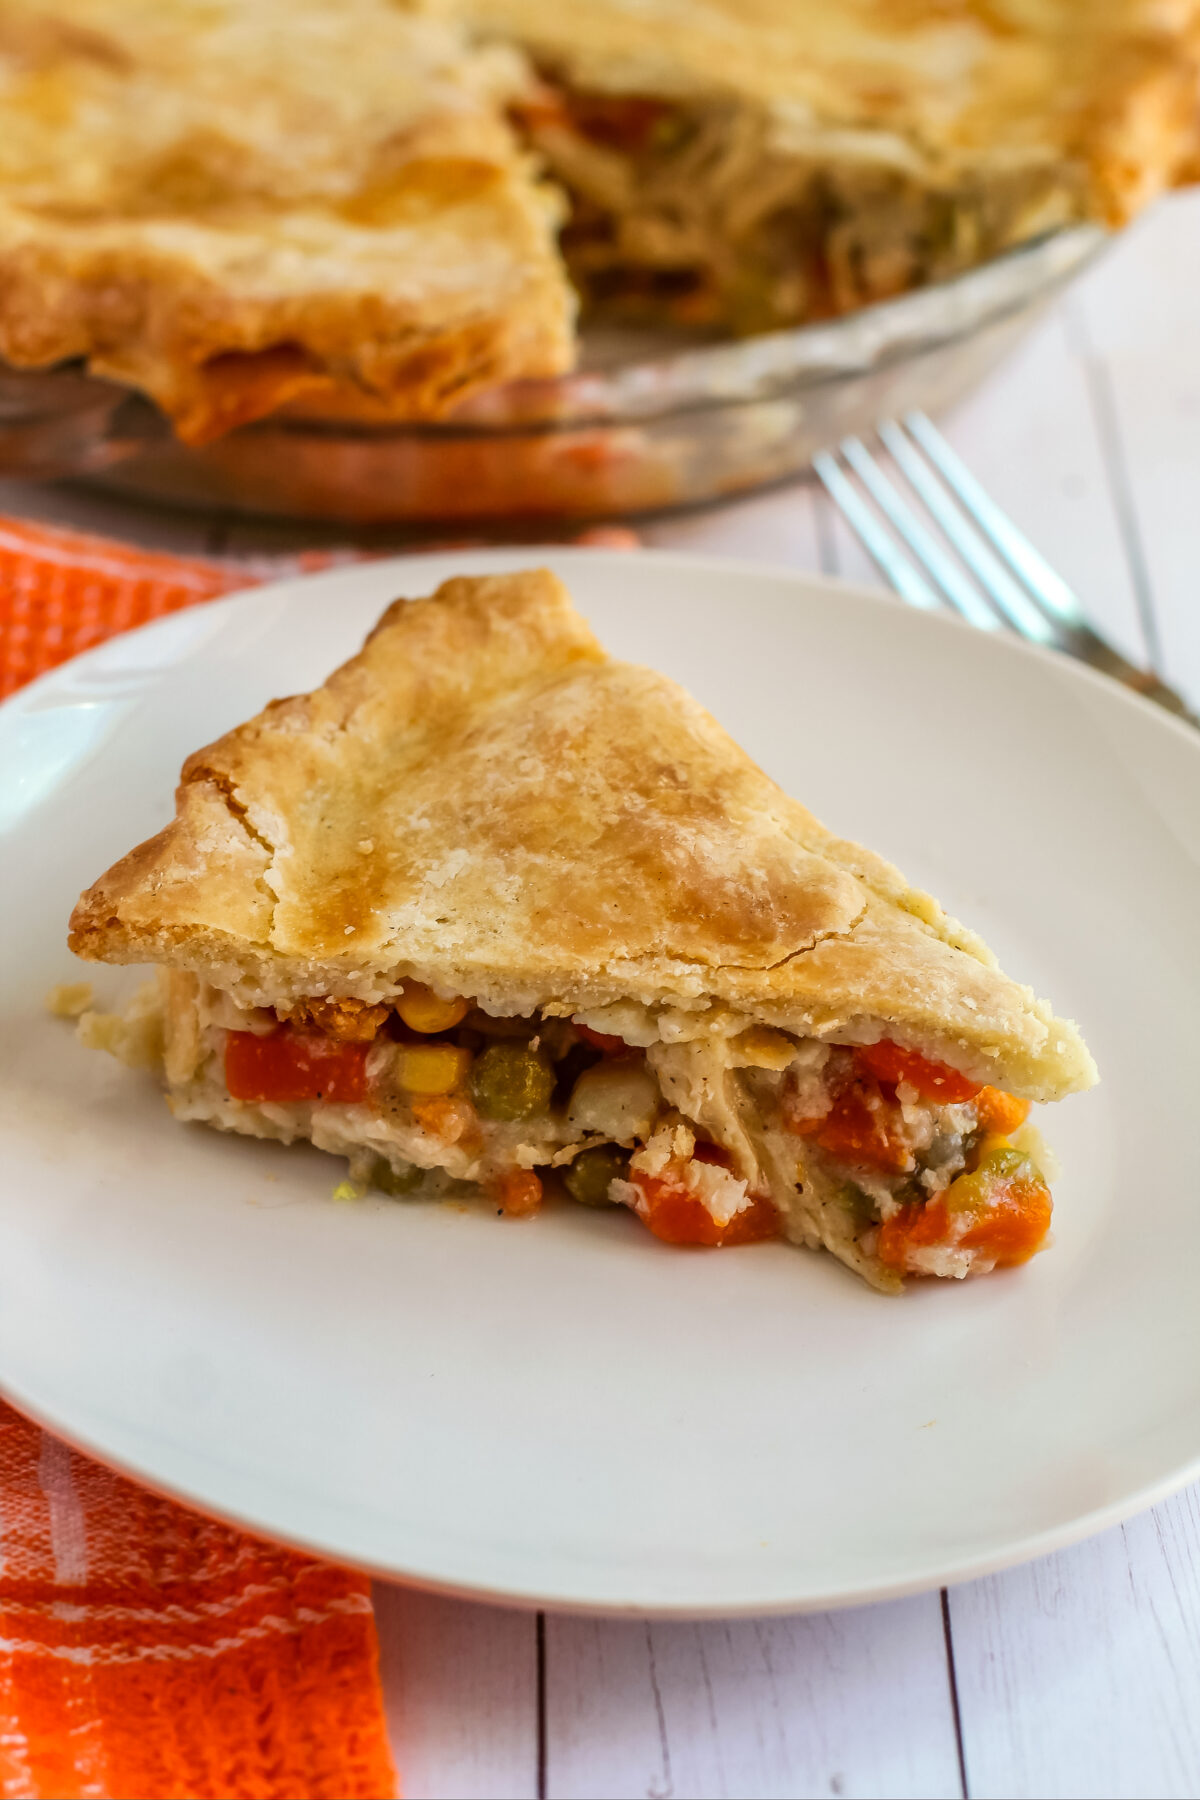 This gluten free chicken pot pie recipe is a real winner. It's hearty and comforting, yet healthy and delicious. What else could you ask for?